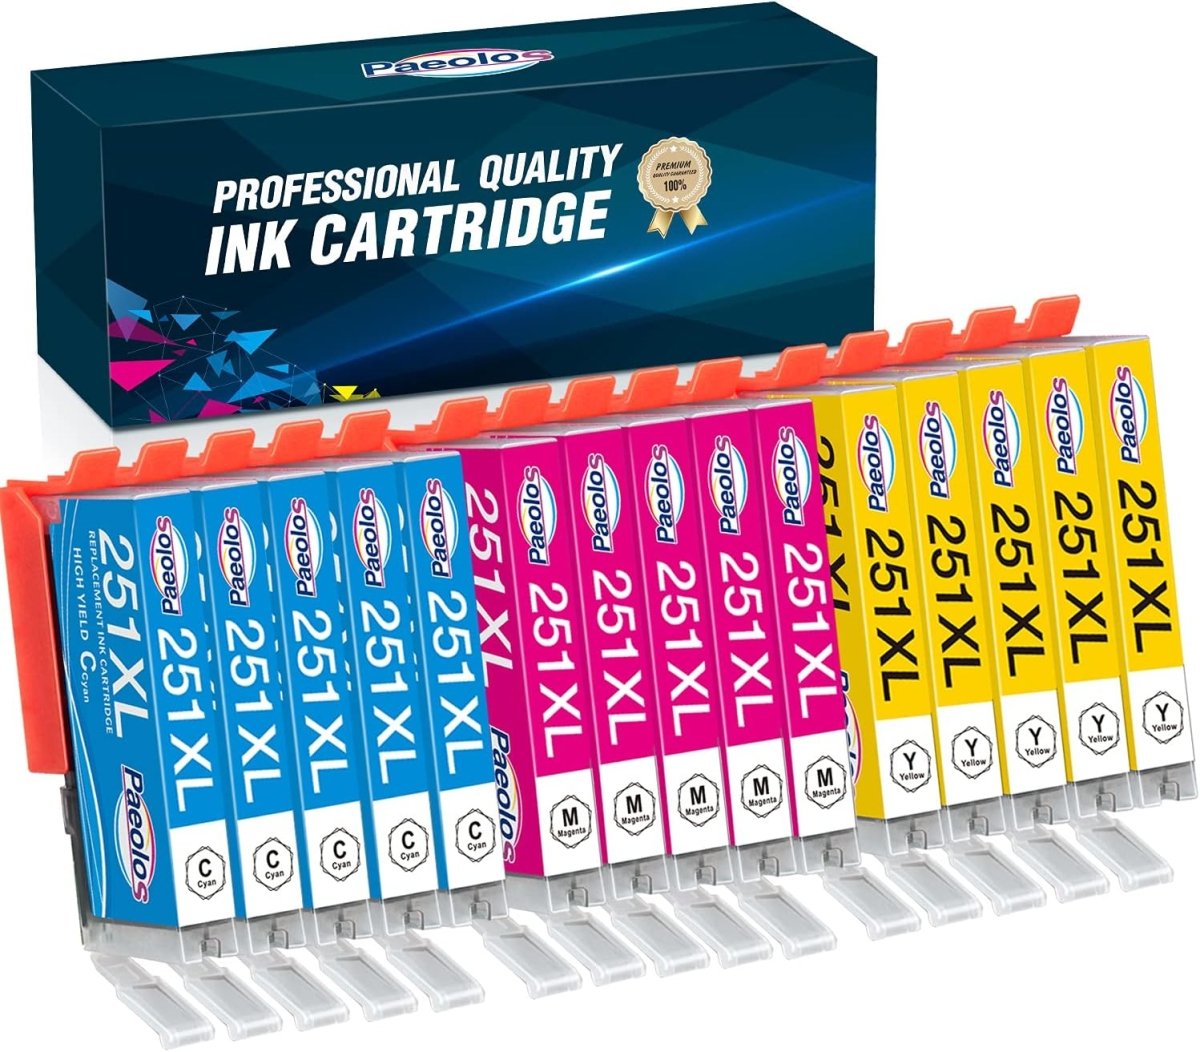 CLI-251XL Ink Cartridges Compatible with Canon Pixma Printer, 15-Packs - Linford Office:Printer Ink & Toner Cartridge